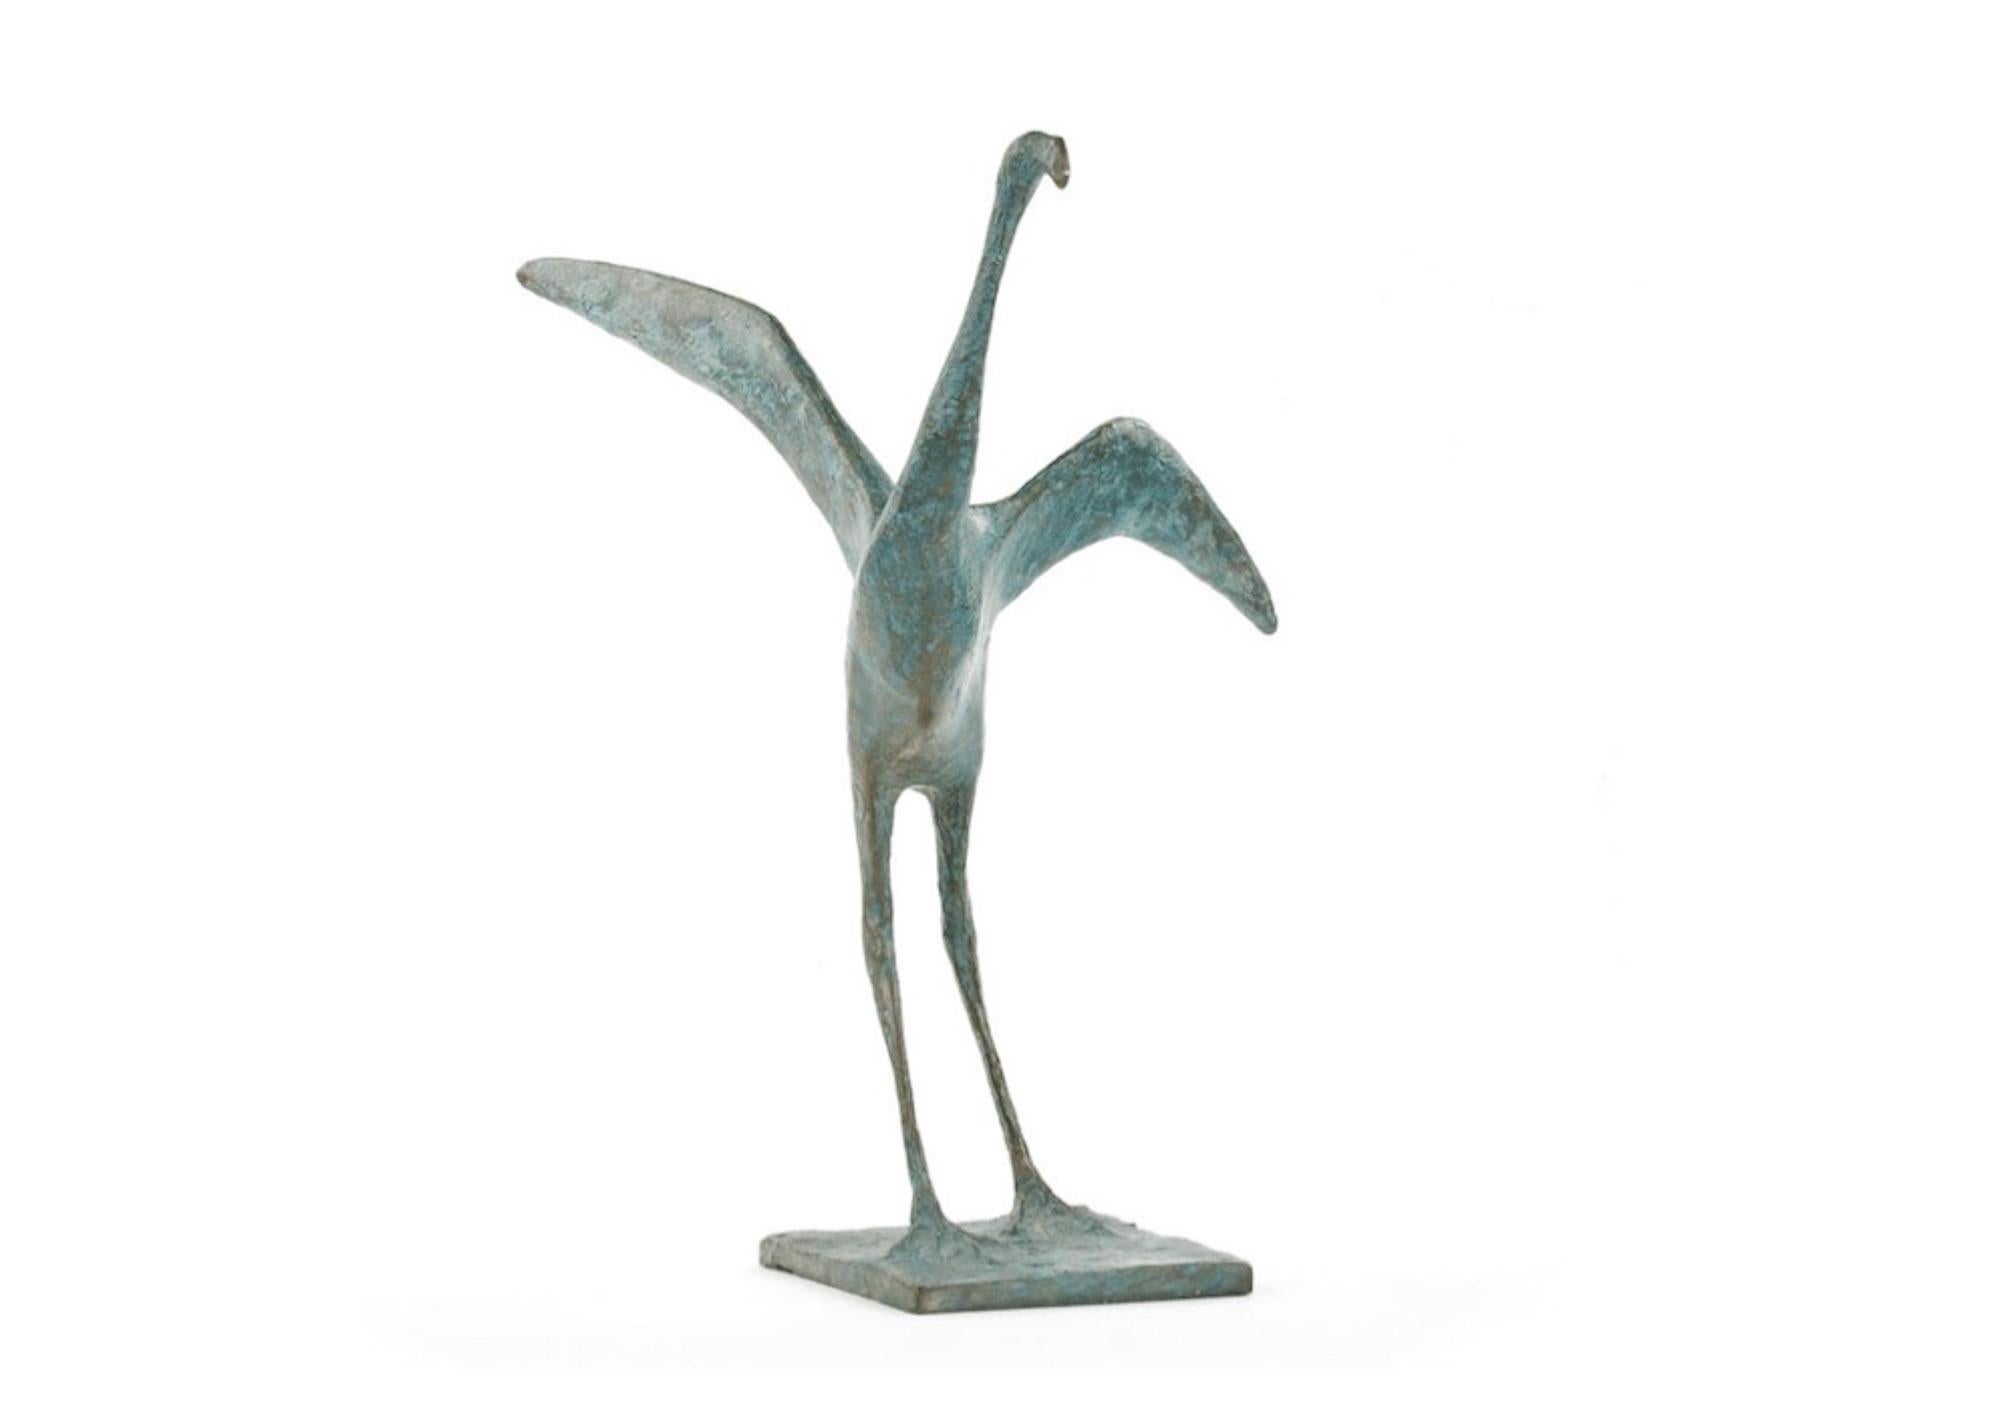 Flight IV is a bronze sculpture by French contemporary artist Pierre Yermia, dimensions are 35 × 26 × 23 cm (13.8 × 10.2 × 9.1 in). The sculpture is signed and numbered, it is part of a limited edition of 8 editions + 4 artist’s proofs, and comes